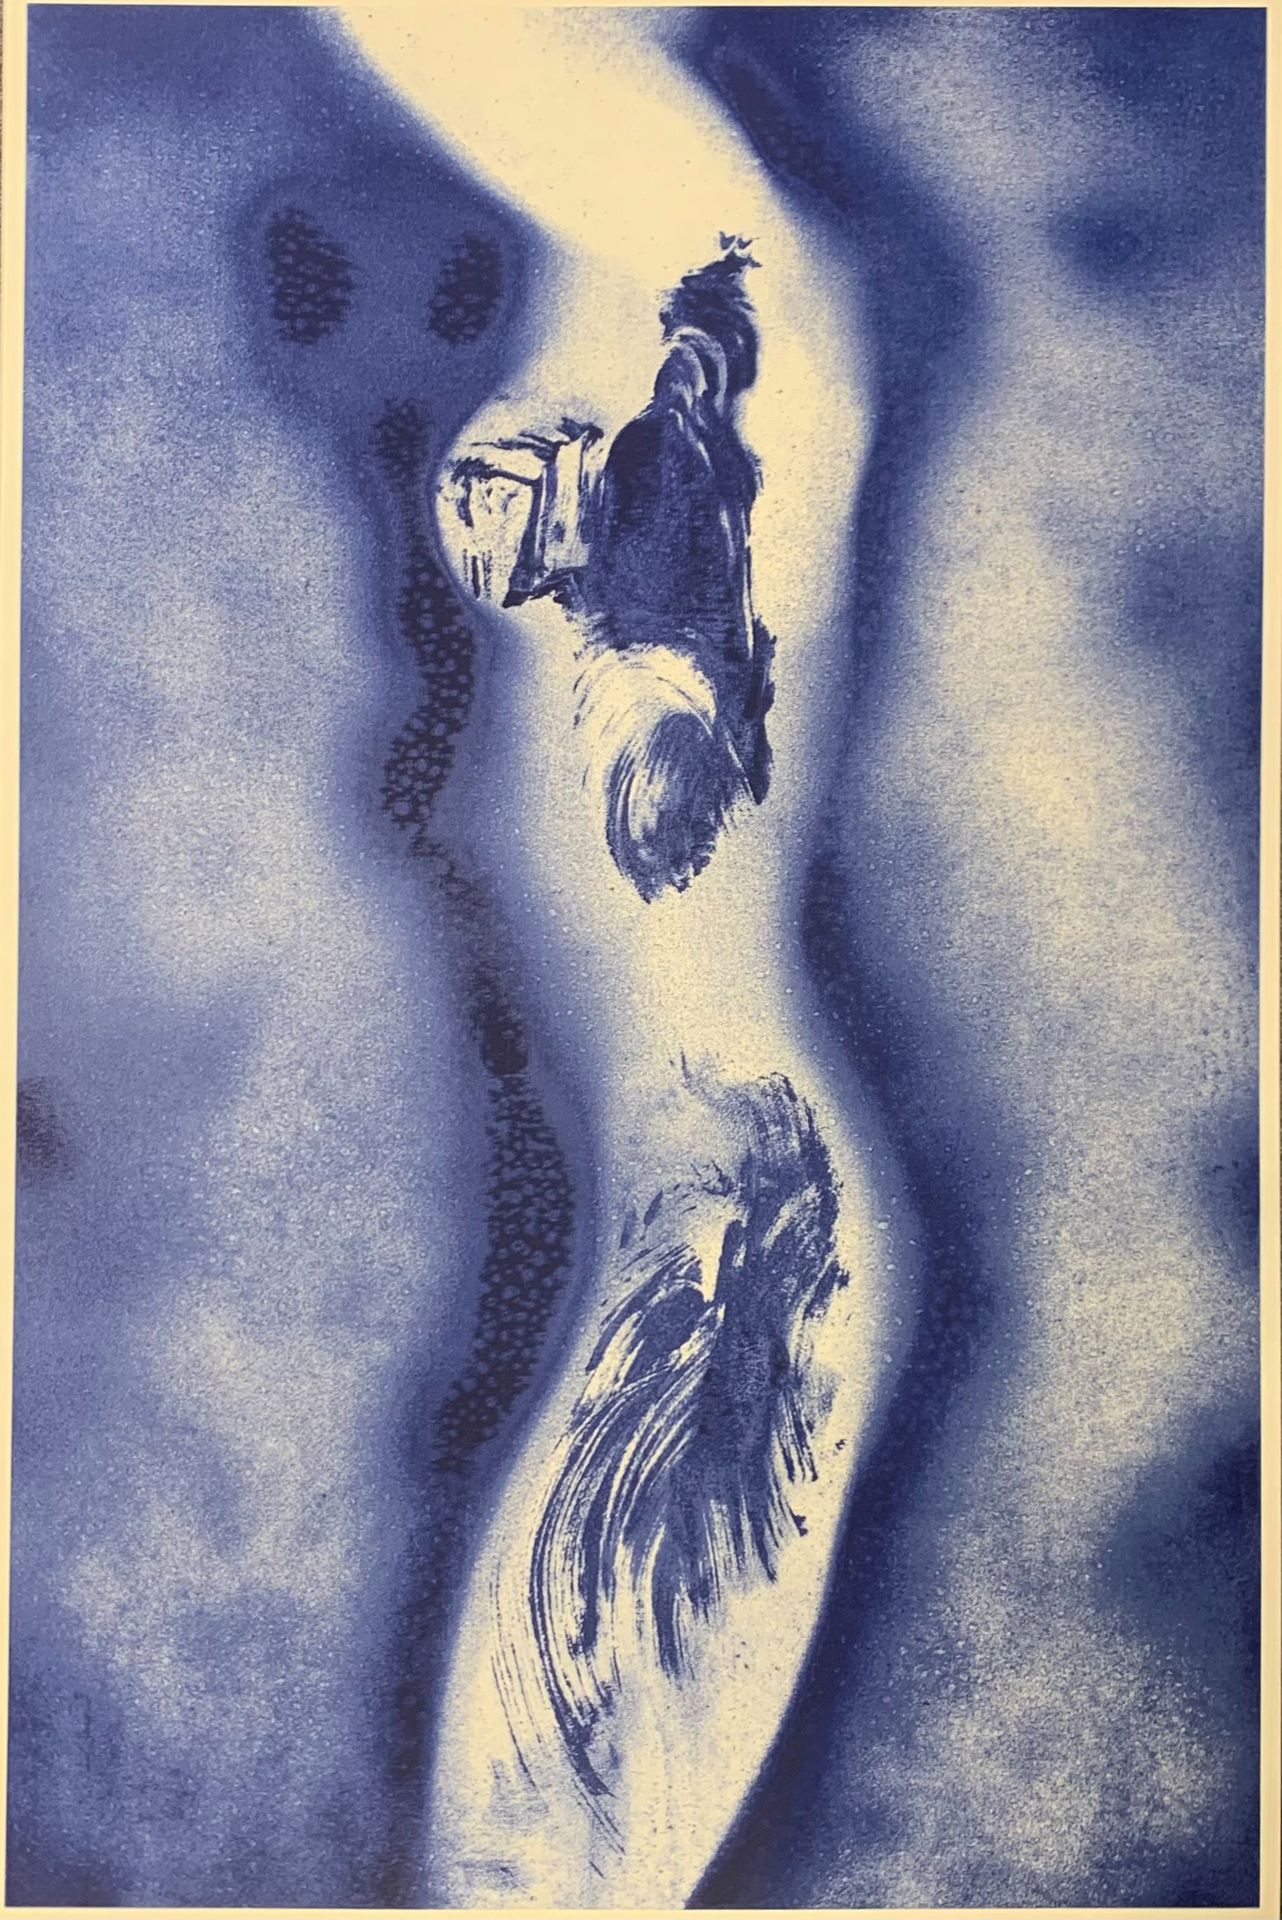 D'APRES YVES KLEIN (1928-1962) ANTHROPOMETRY 148, 2005
Lithography and silkscree&hellip;